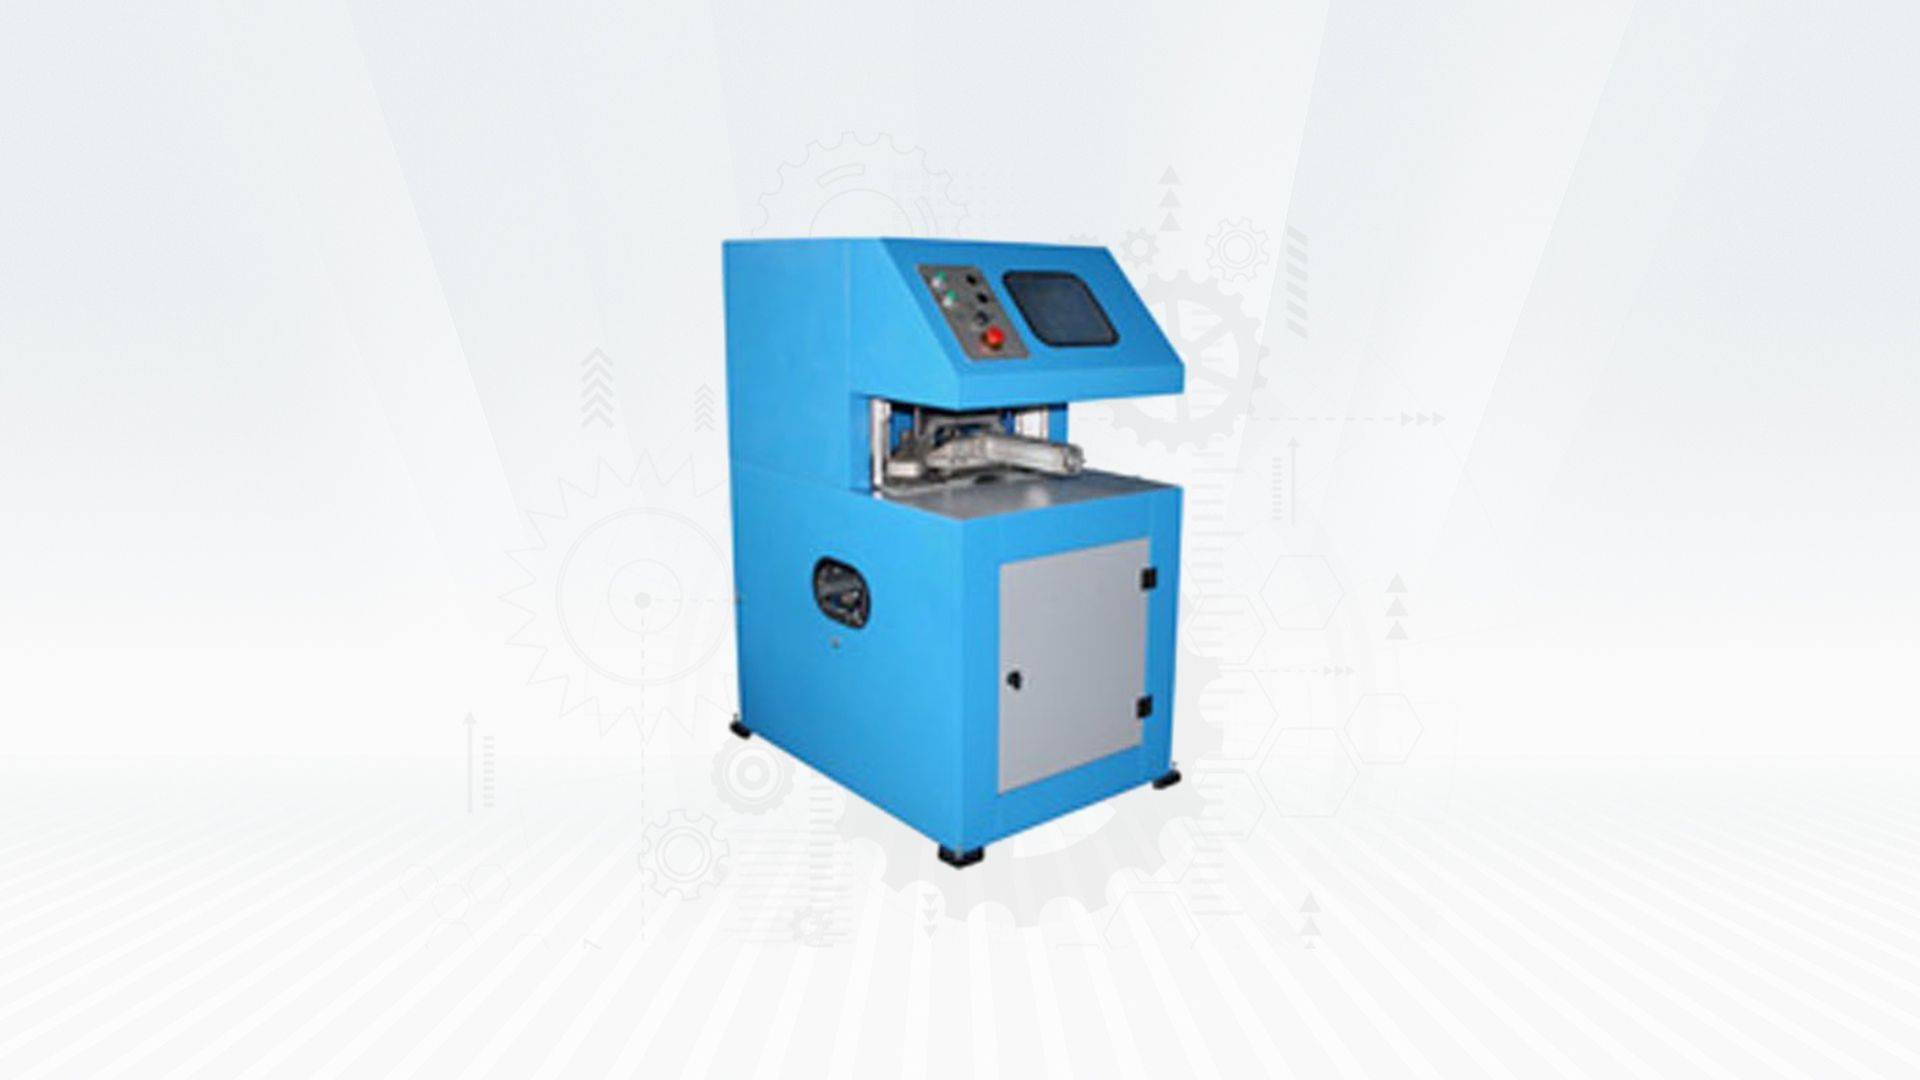 PVC CLEANING MACHINES - AUTOMATIC SOLID CLEANING MACHINE (2 KNIVES)